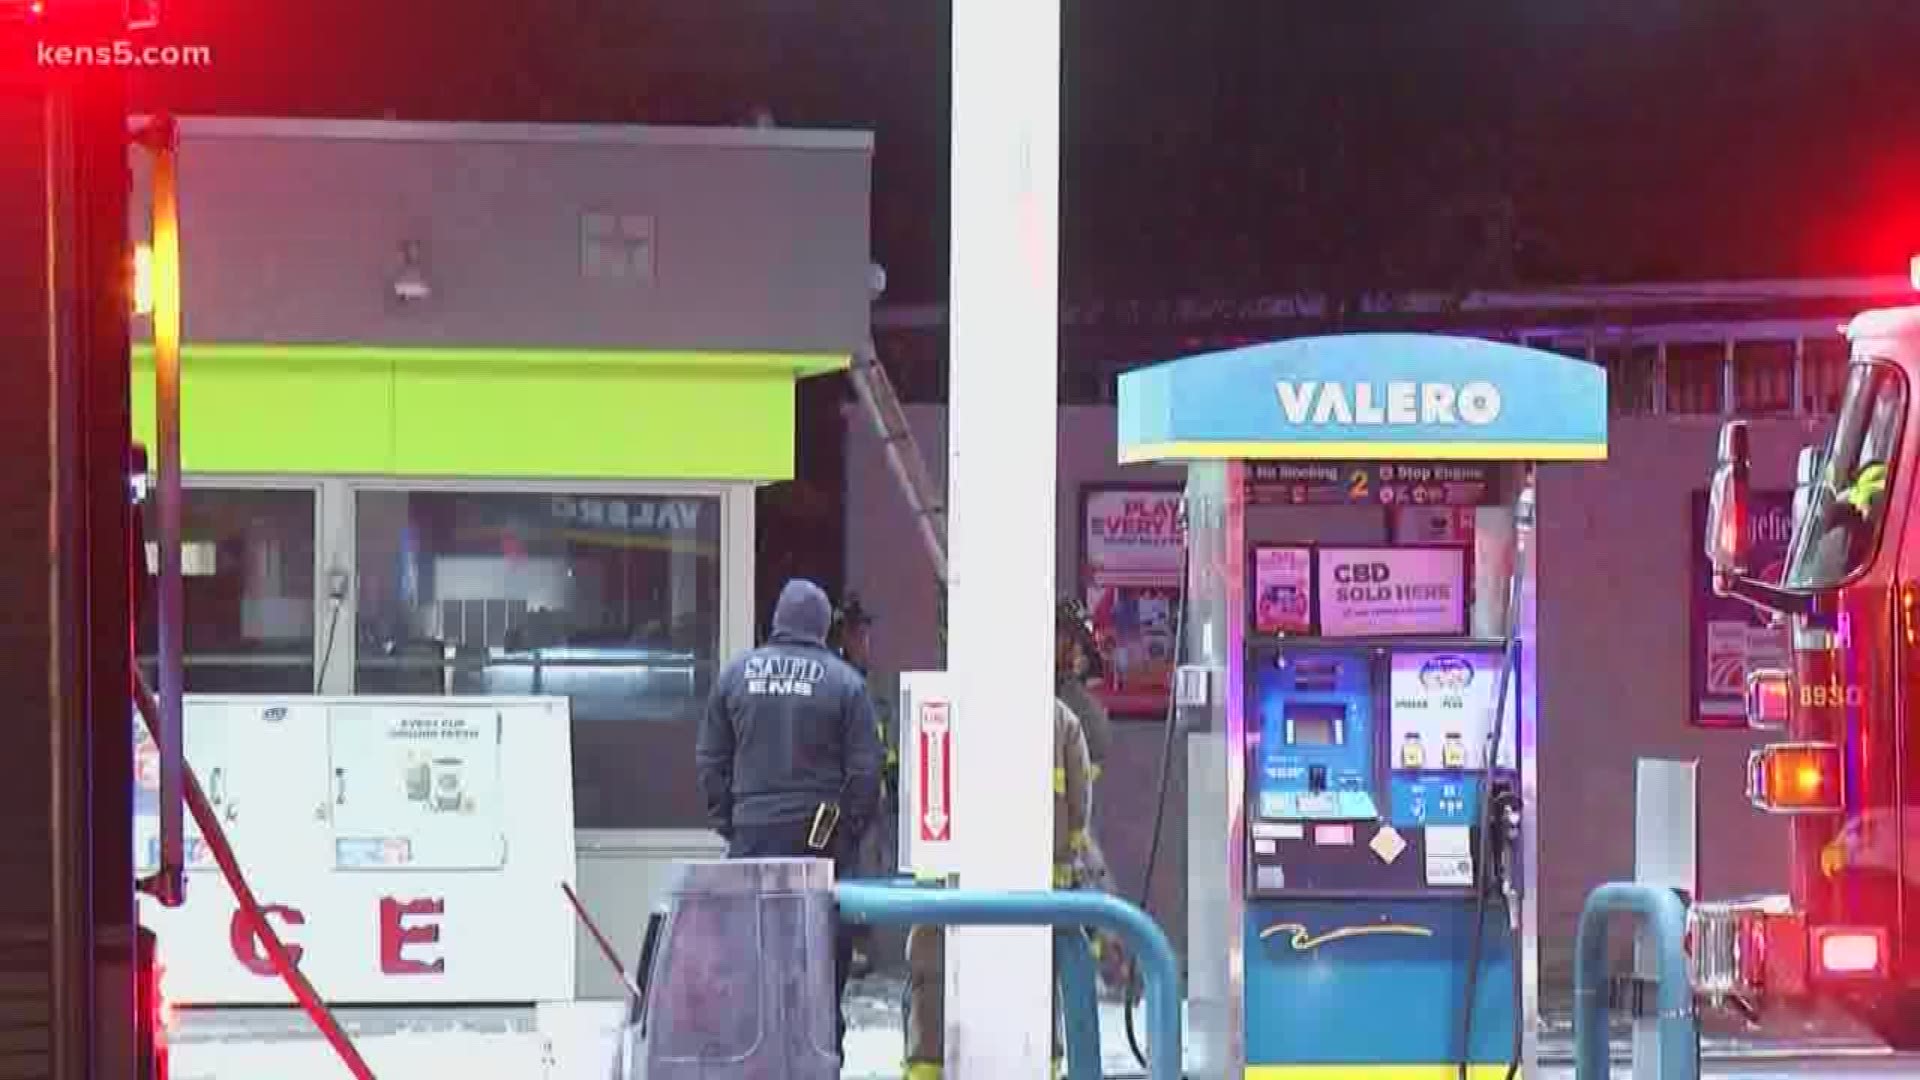 A fire at a gas station on the south side is being called suspicious by fire officials.